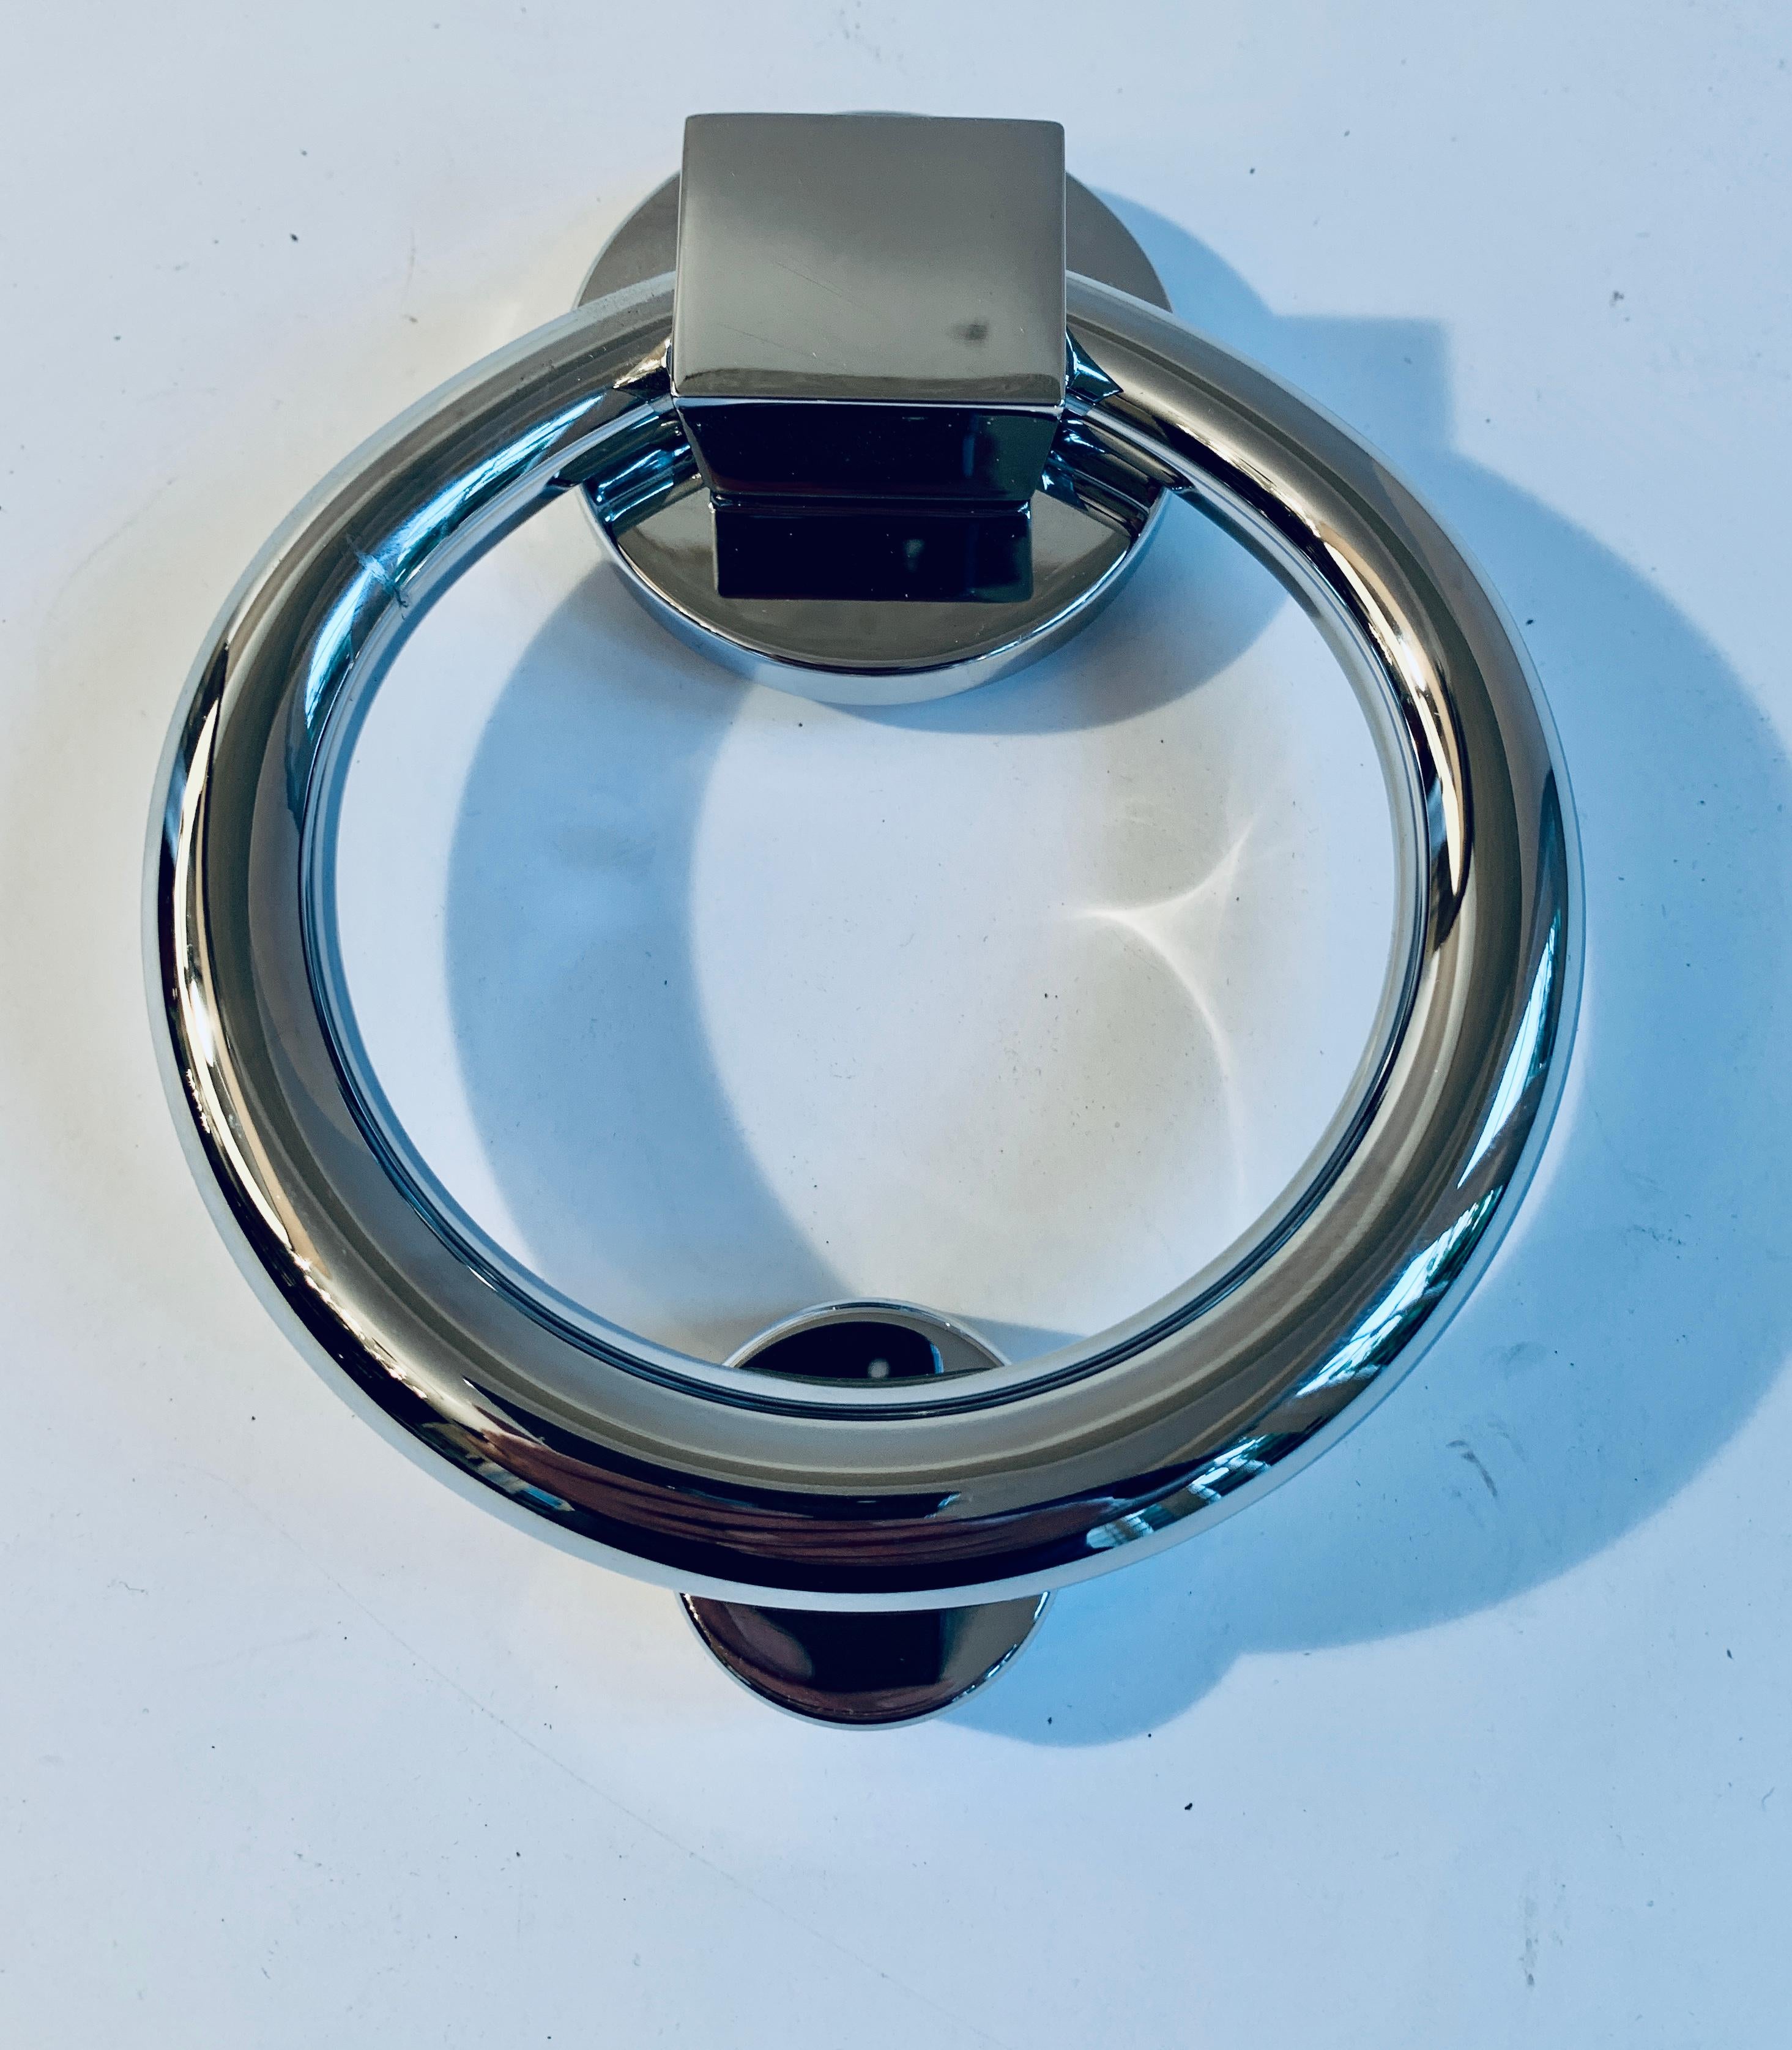 Polished chrome door knocker, a wonderful never used chrome piece, polished and ready to install, the knocker has small piece to hit, comes with adequate hardware for immediate installation.